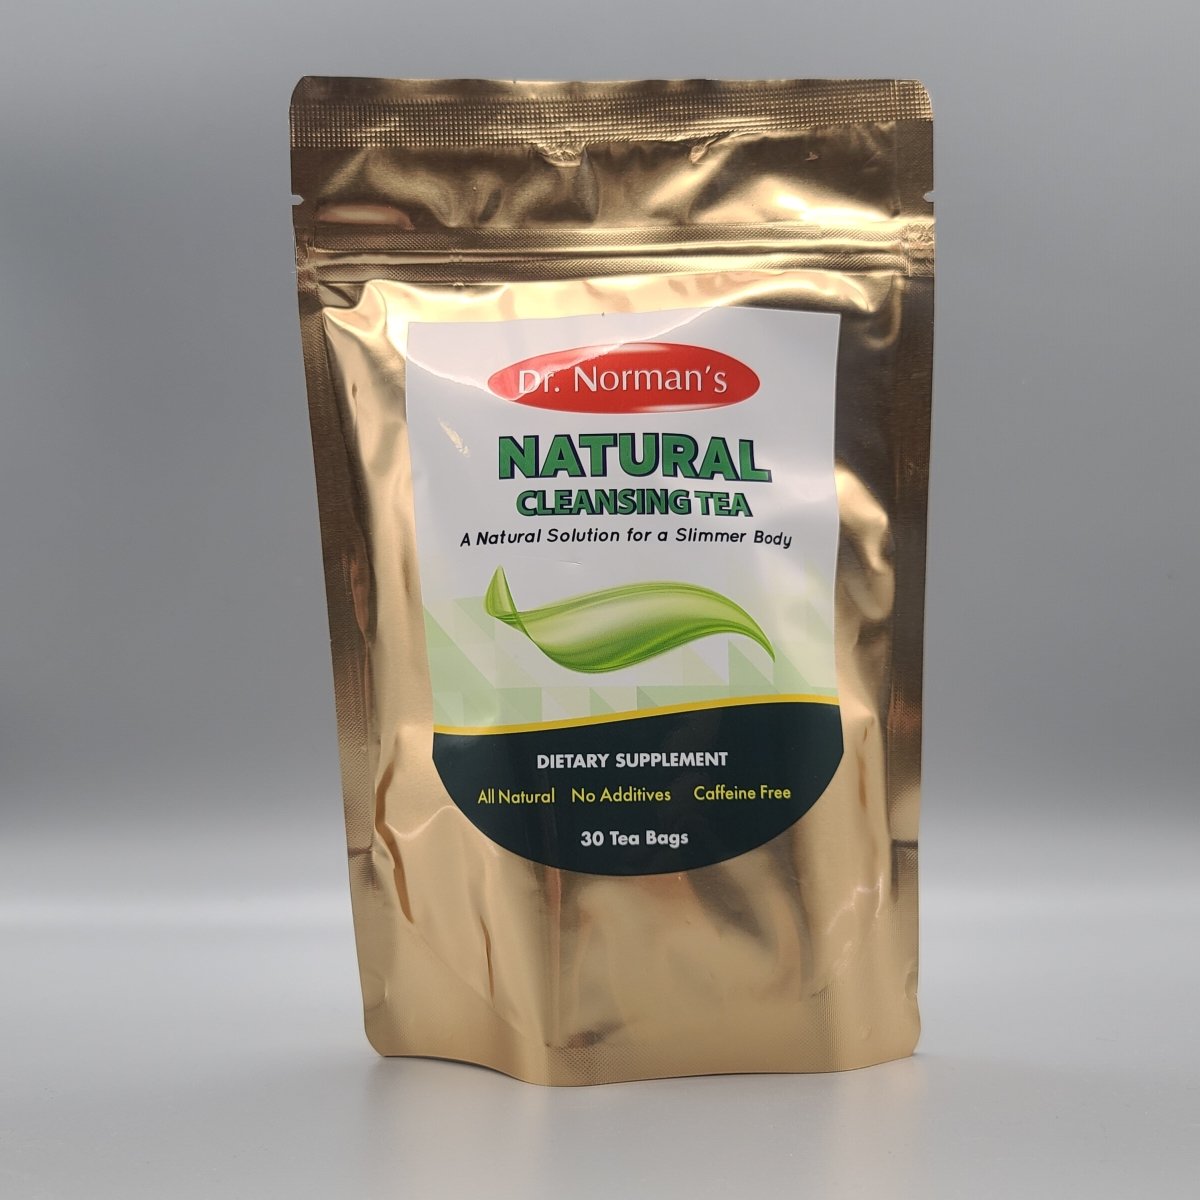 Natural Cleansing Tea - A Natural Solution for a Slimmer Body - 30 Bags